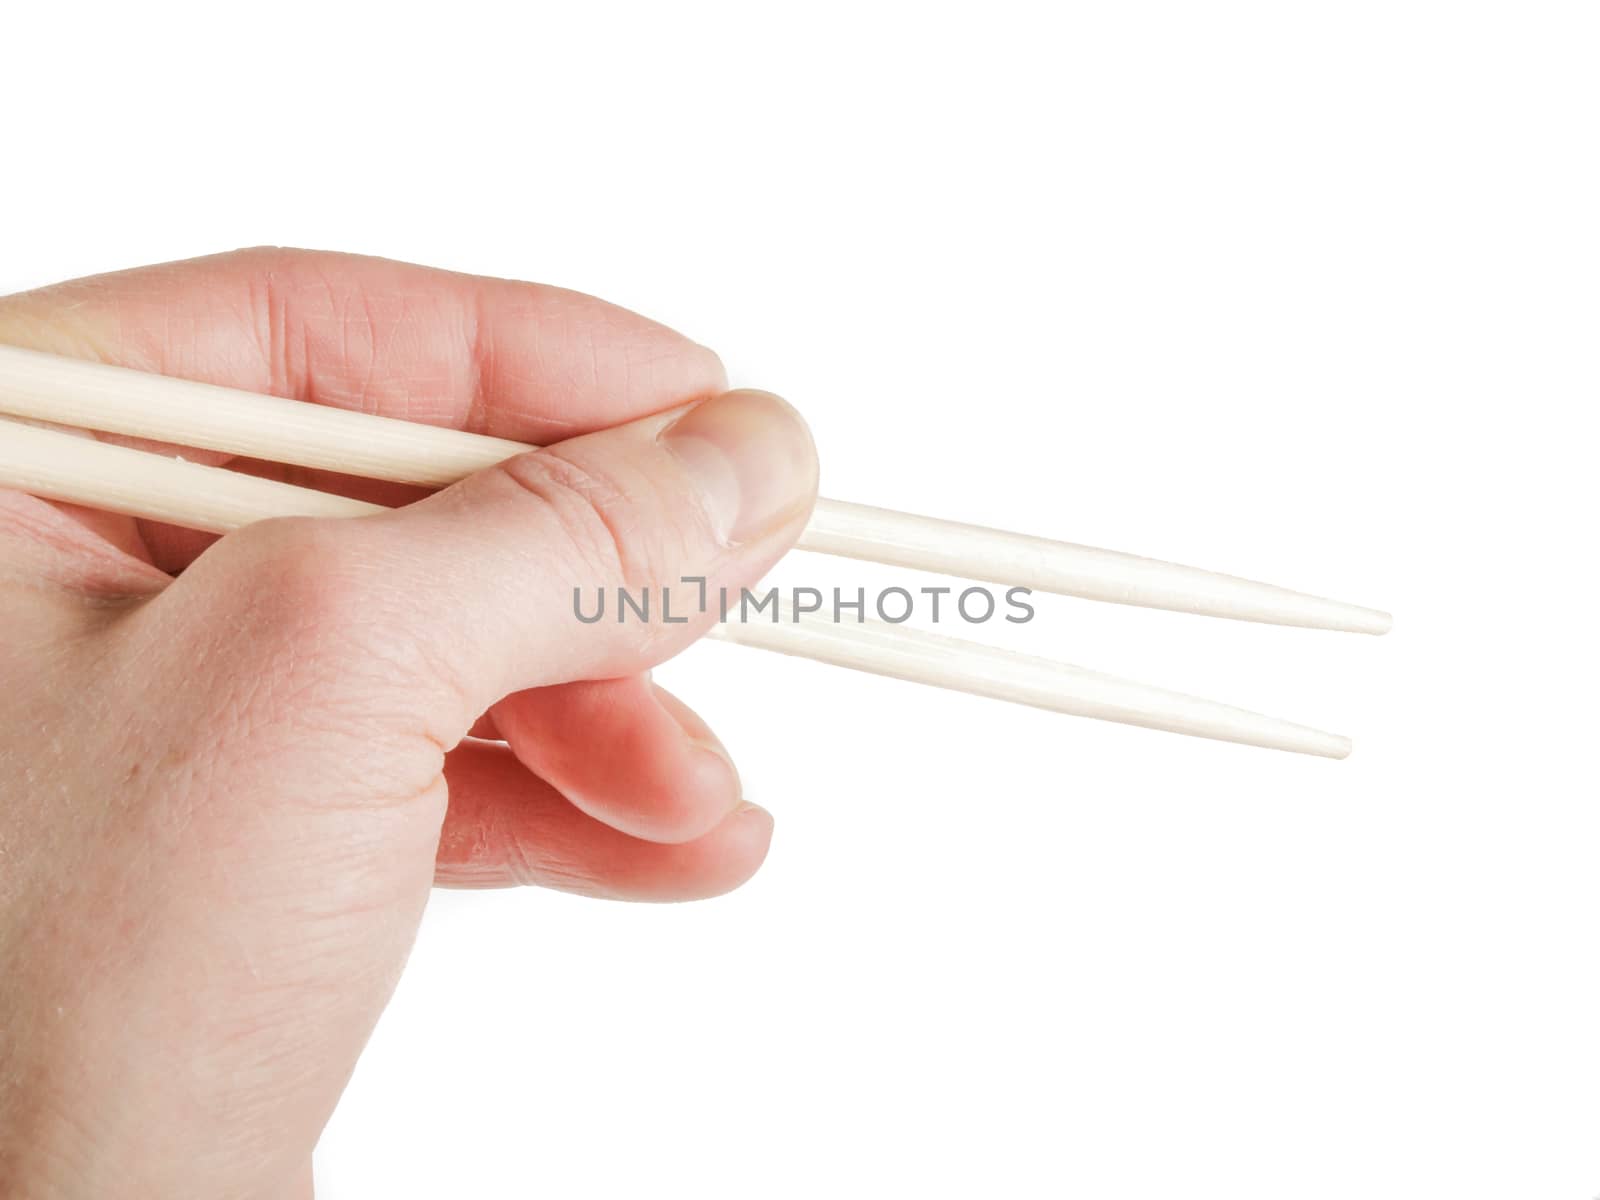 Person holding a pair of wooden chopsticks towards white background